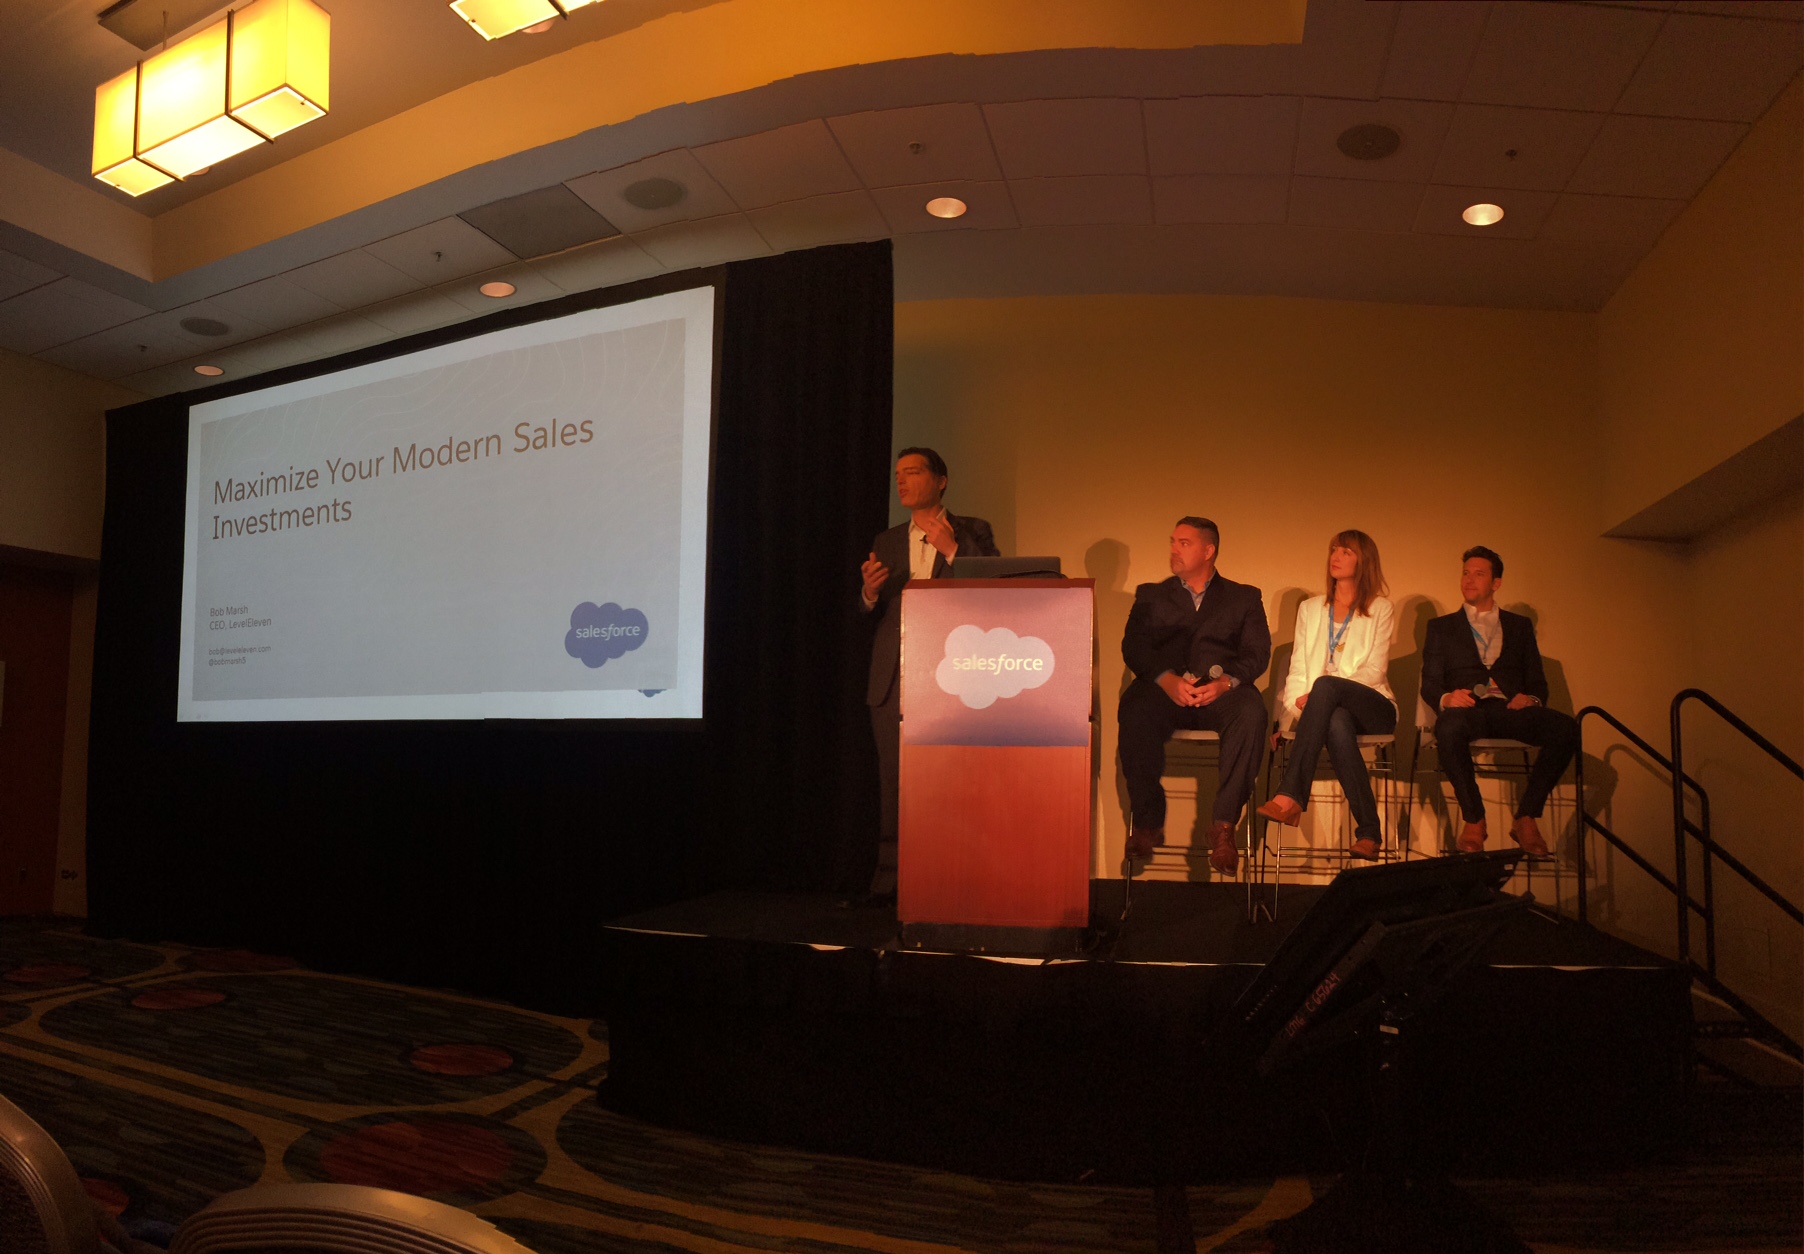 Maximize Your Modern Sales Investments [Live at Dreamforce]